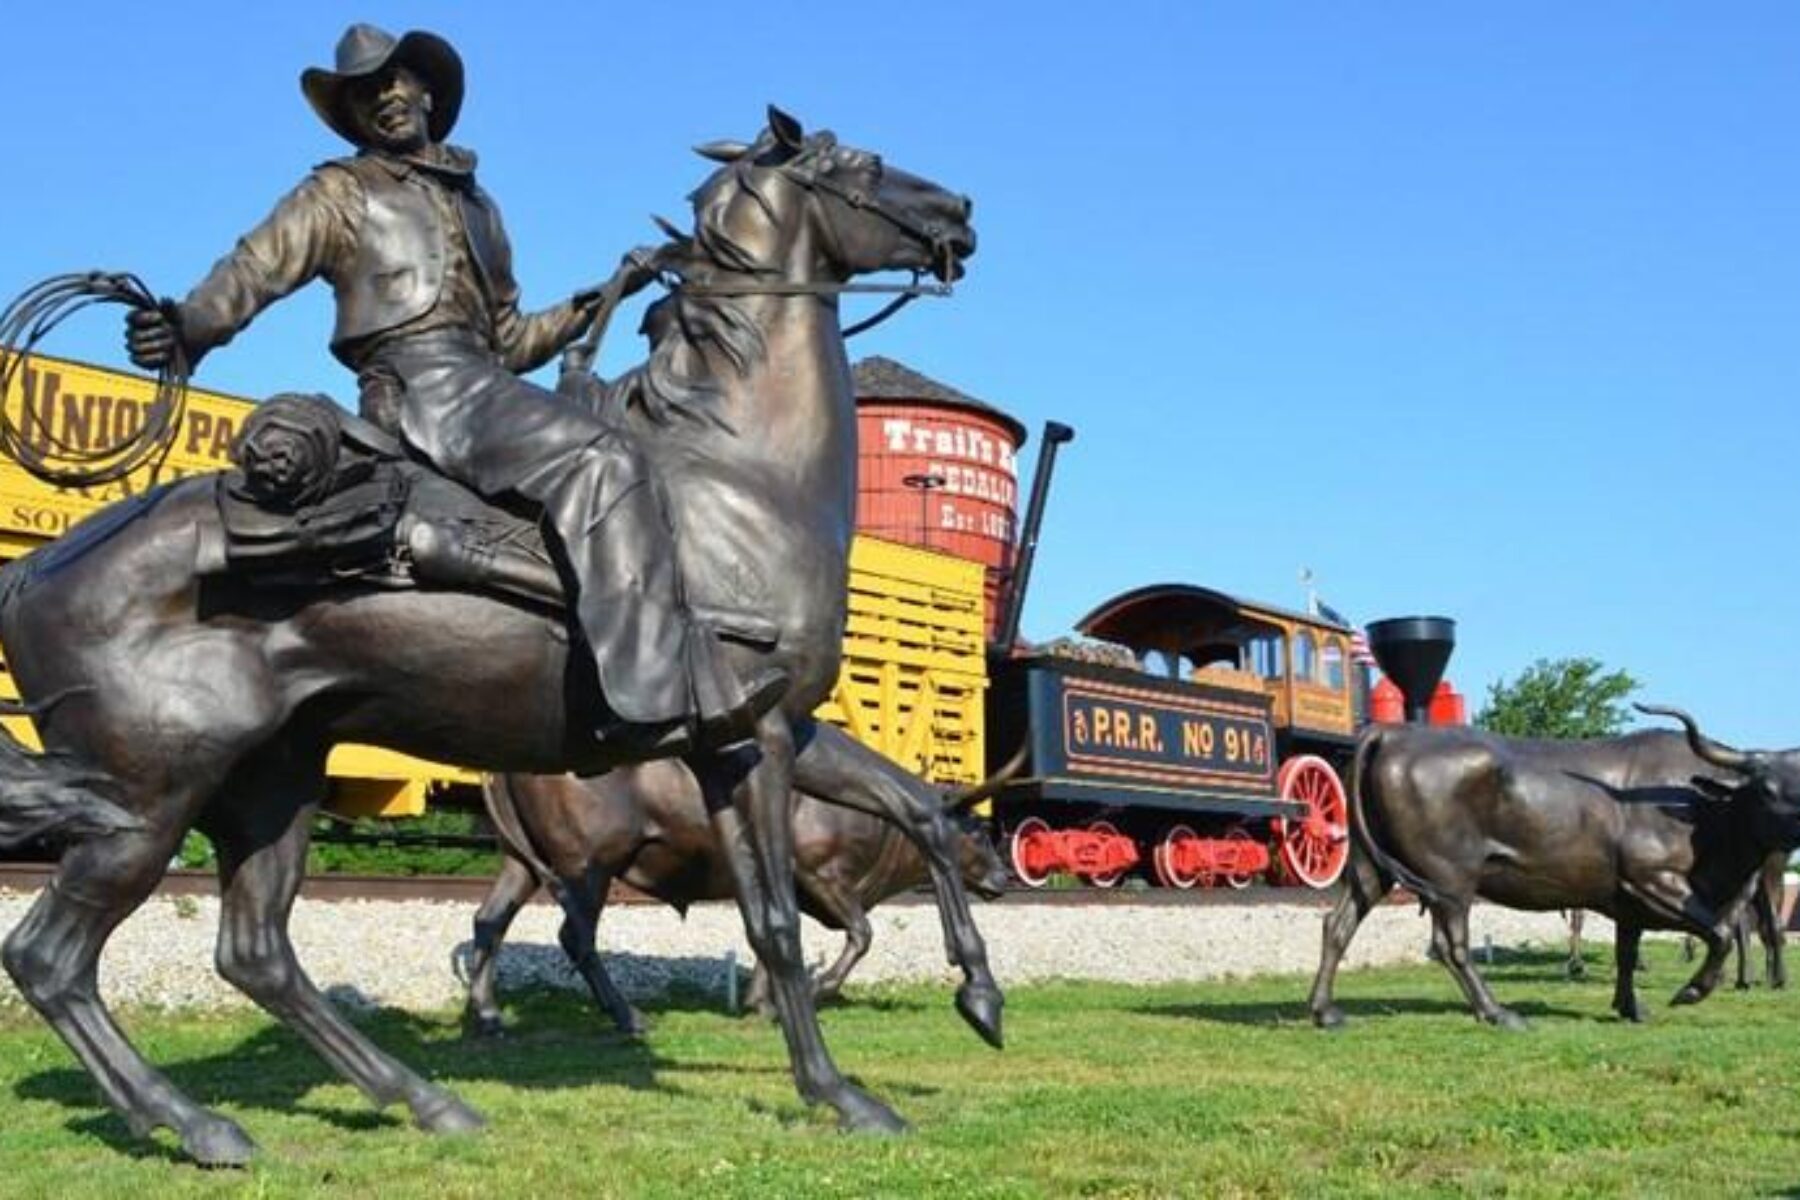 Trail's End Monument in Sedalia, 35 miles east of the Katy Trail's western end in Clinton, celebrating Sedalia's history as the first cow town | Photo by Danielle Taylor